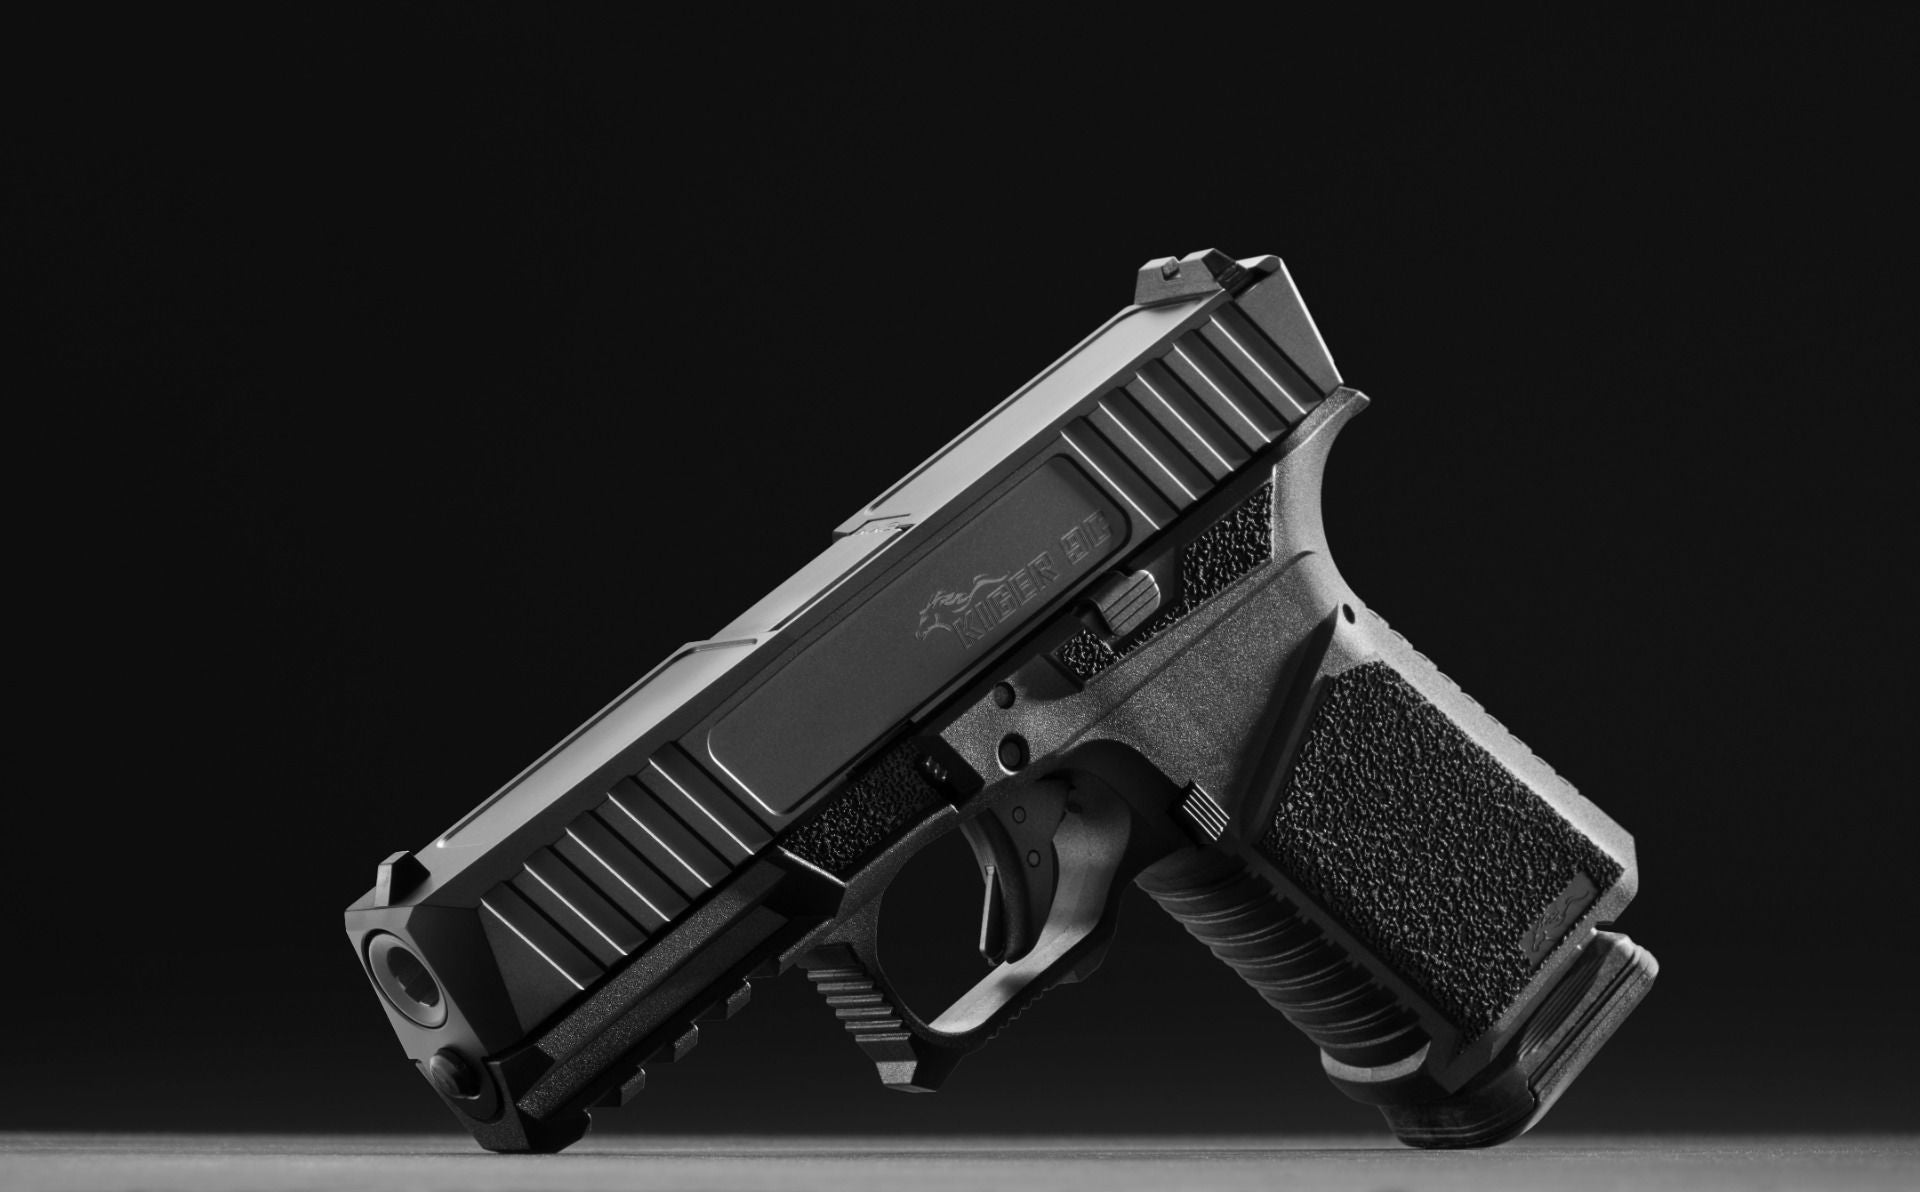 The KIGER-9c - Anderson Manufacturing's First Handgun